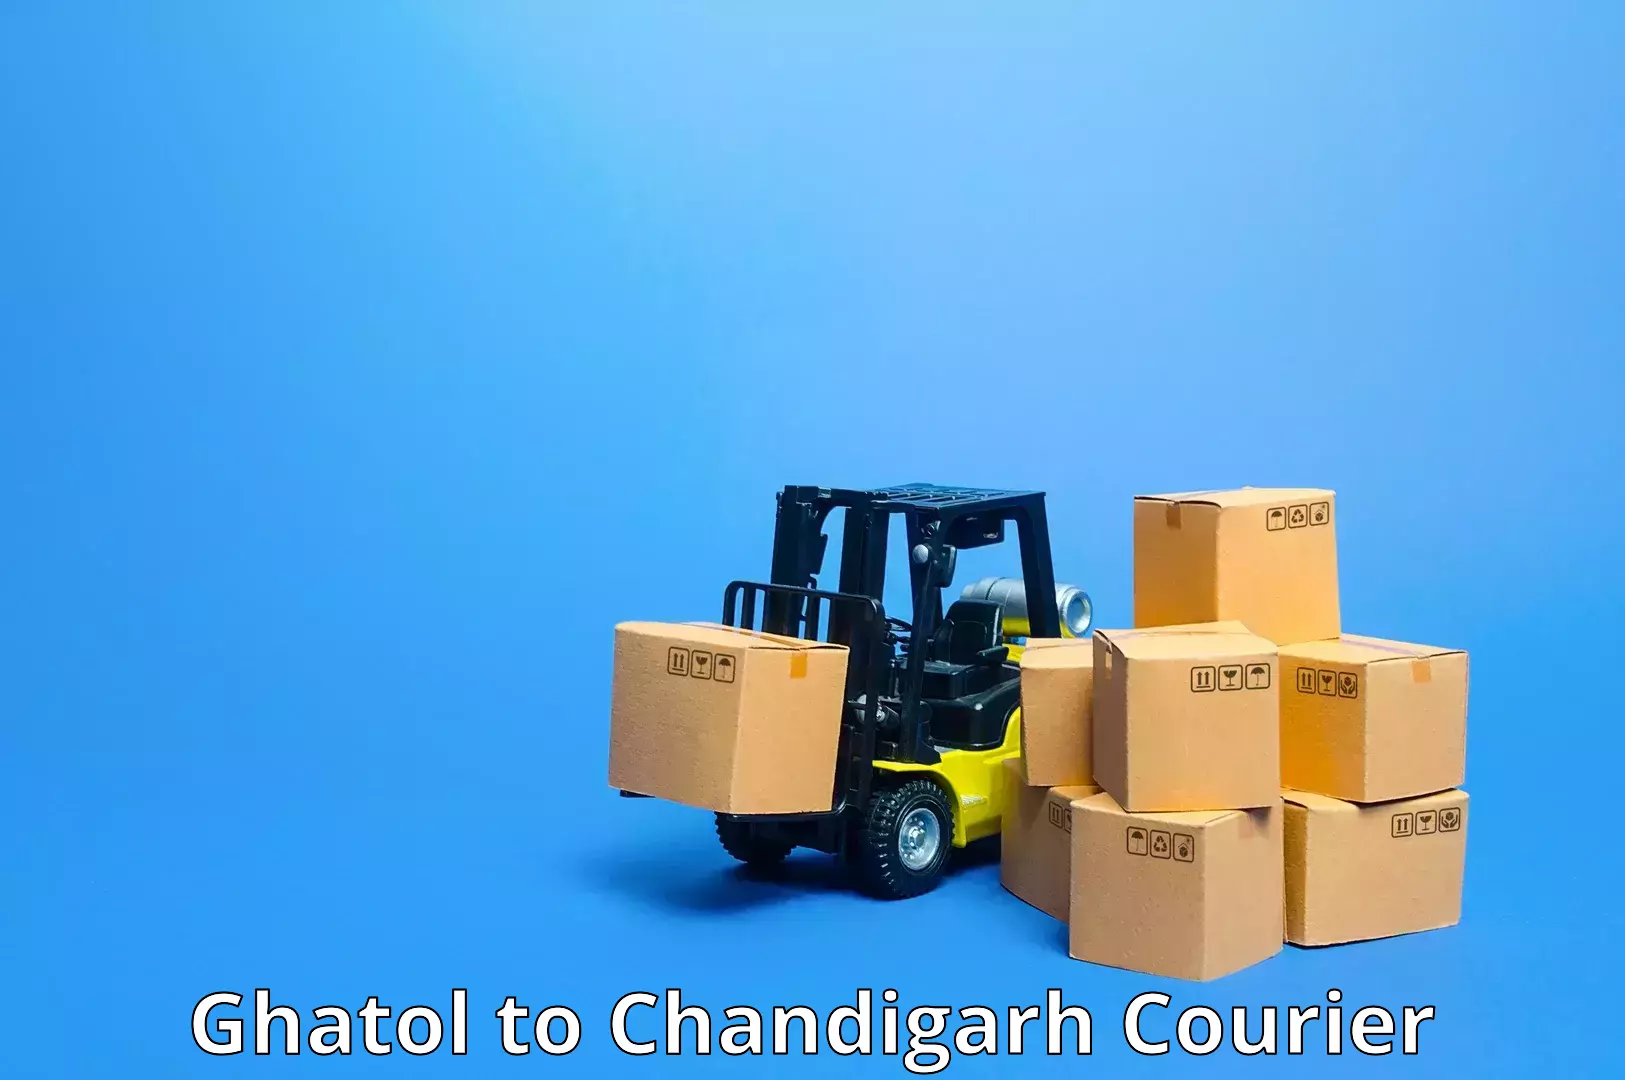 Nationwide parcel services Ghatol to Chandigarh